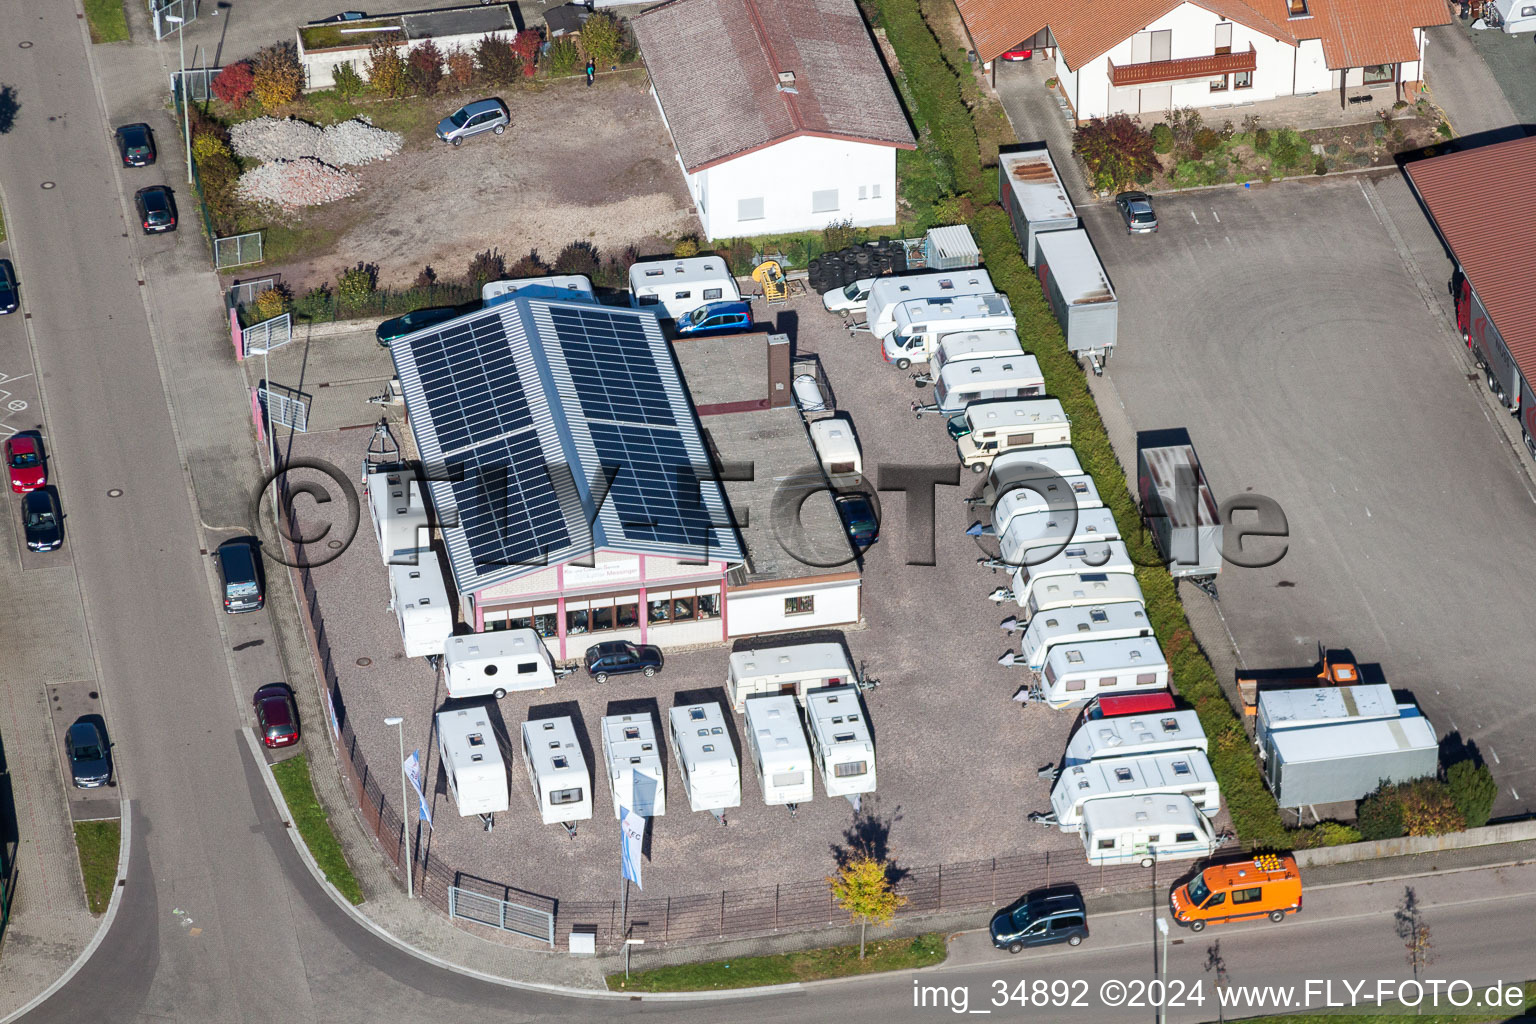 Building complex and grounds of the automotive repair shop Kfz- and Caravan-Service Messinger in the district Gewerbegebiet Horst in Kandel in the state Rhineland-Palatinate, Germany